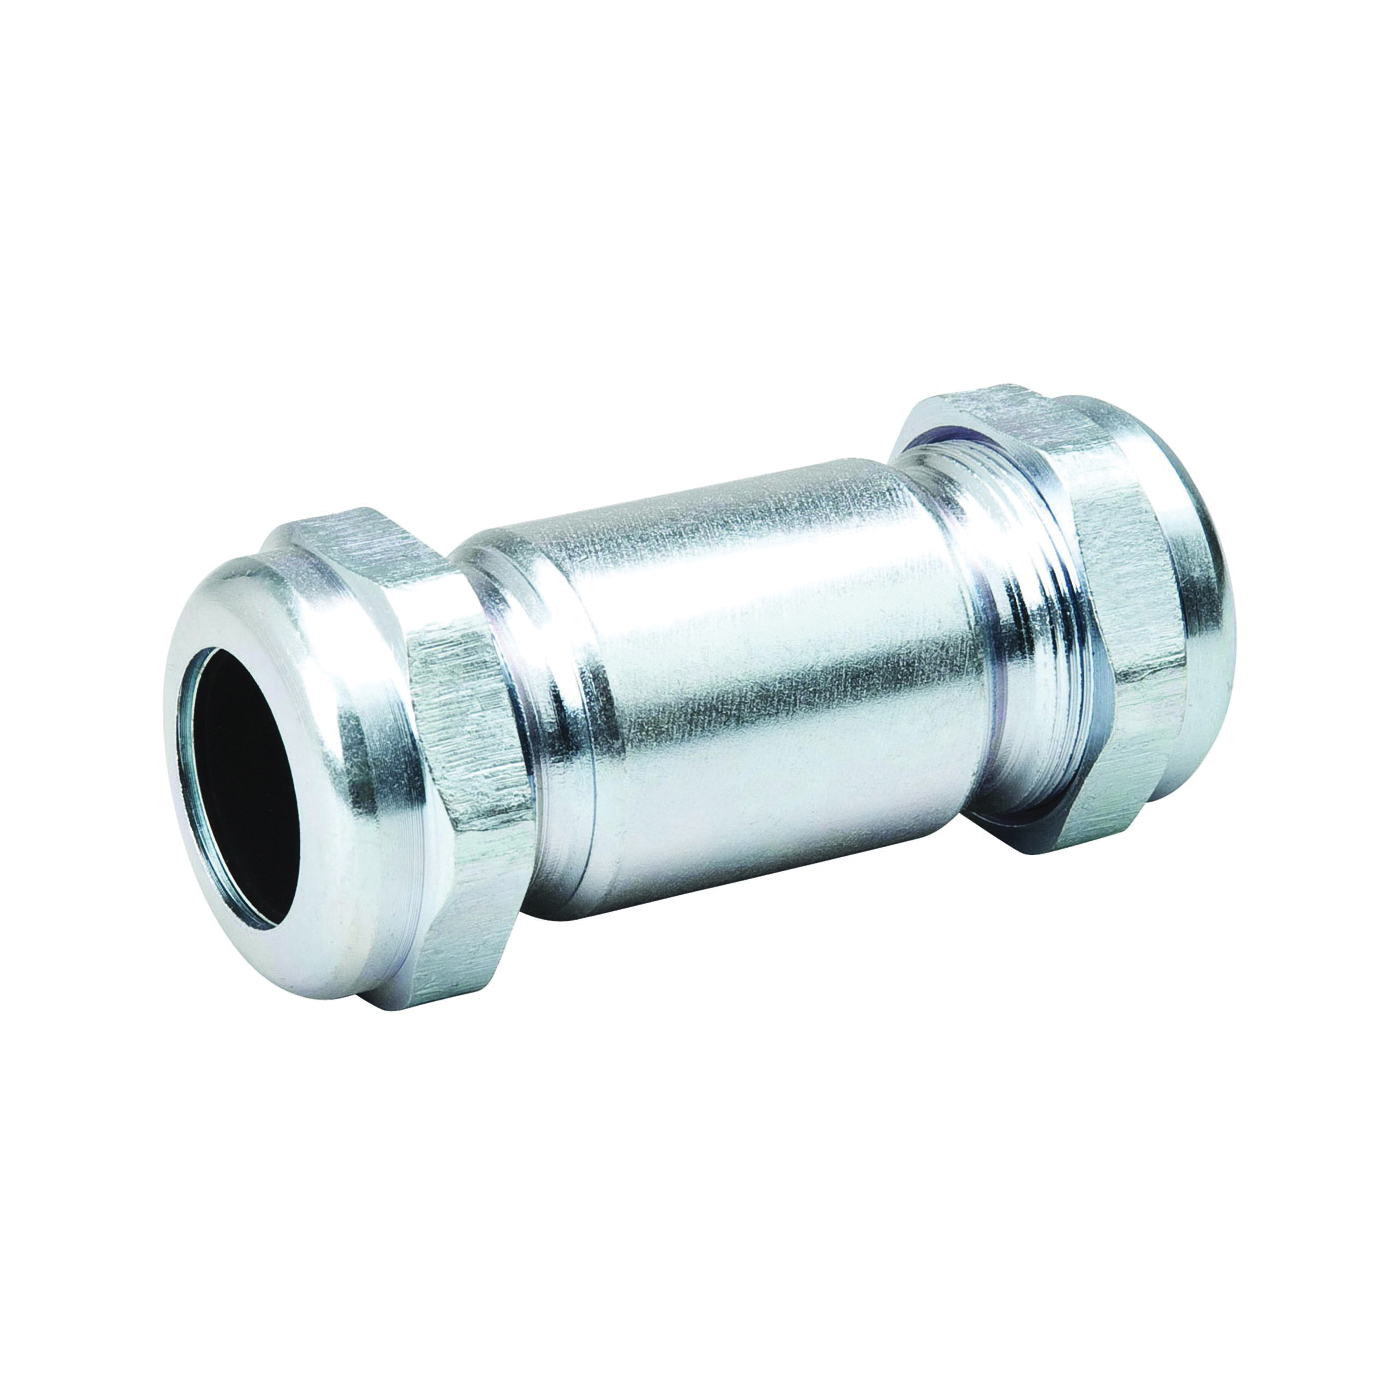 160-004HC Pipe Coupling, 3/4 in, Compression x IPS, 125 psi Pressure